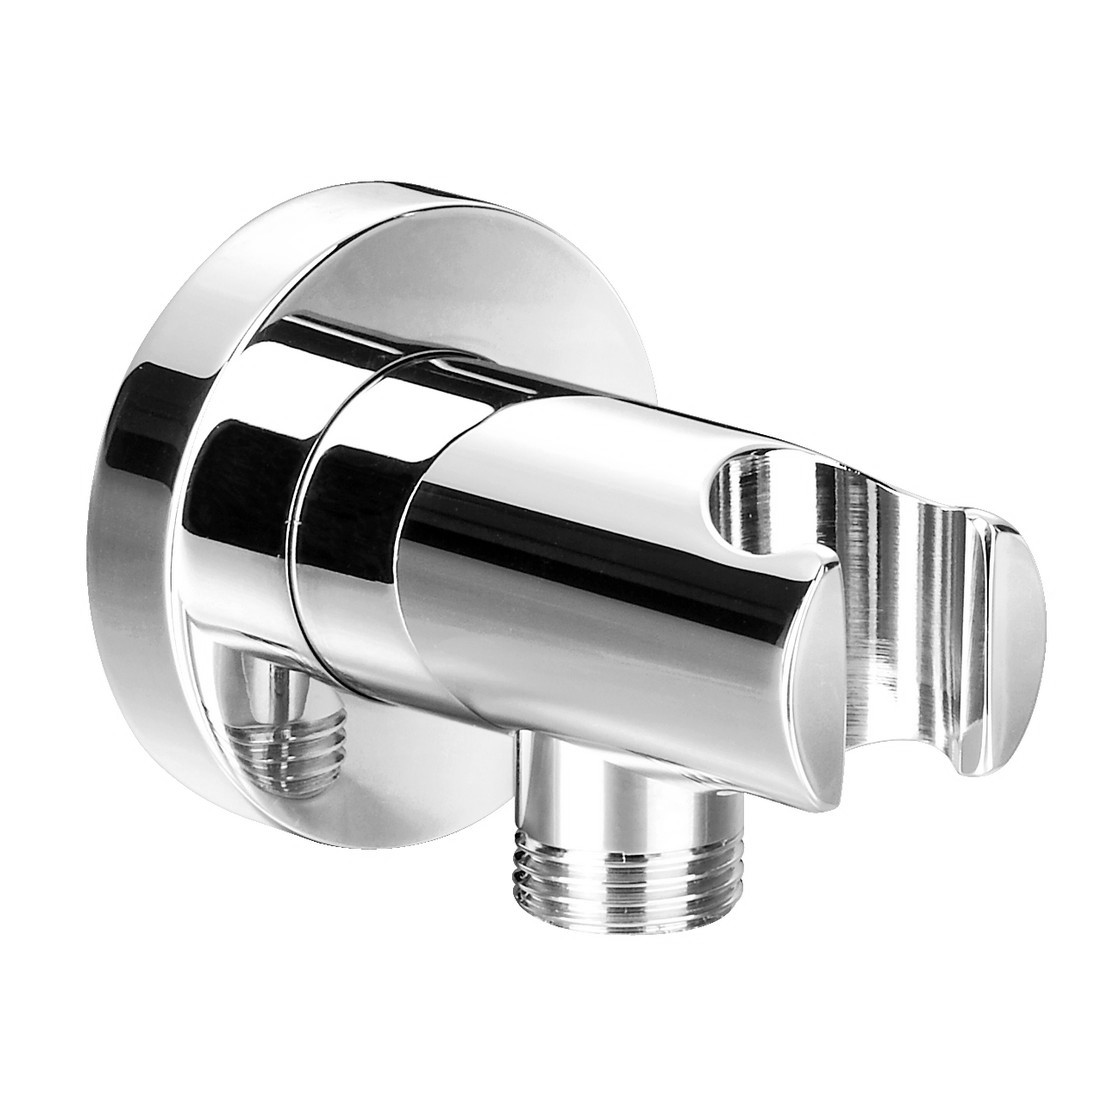 Water connection with hand shower holder 802